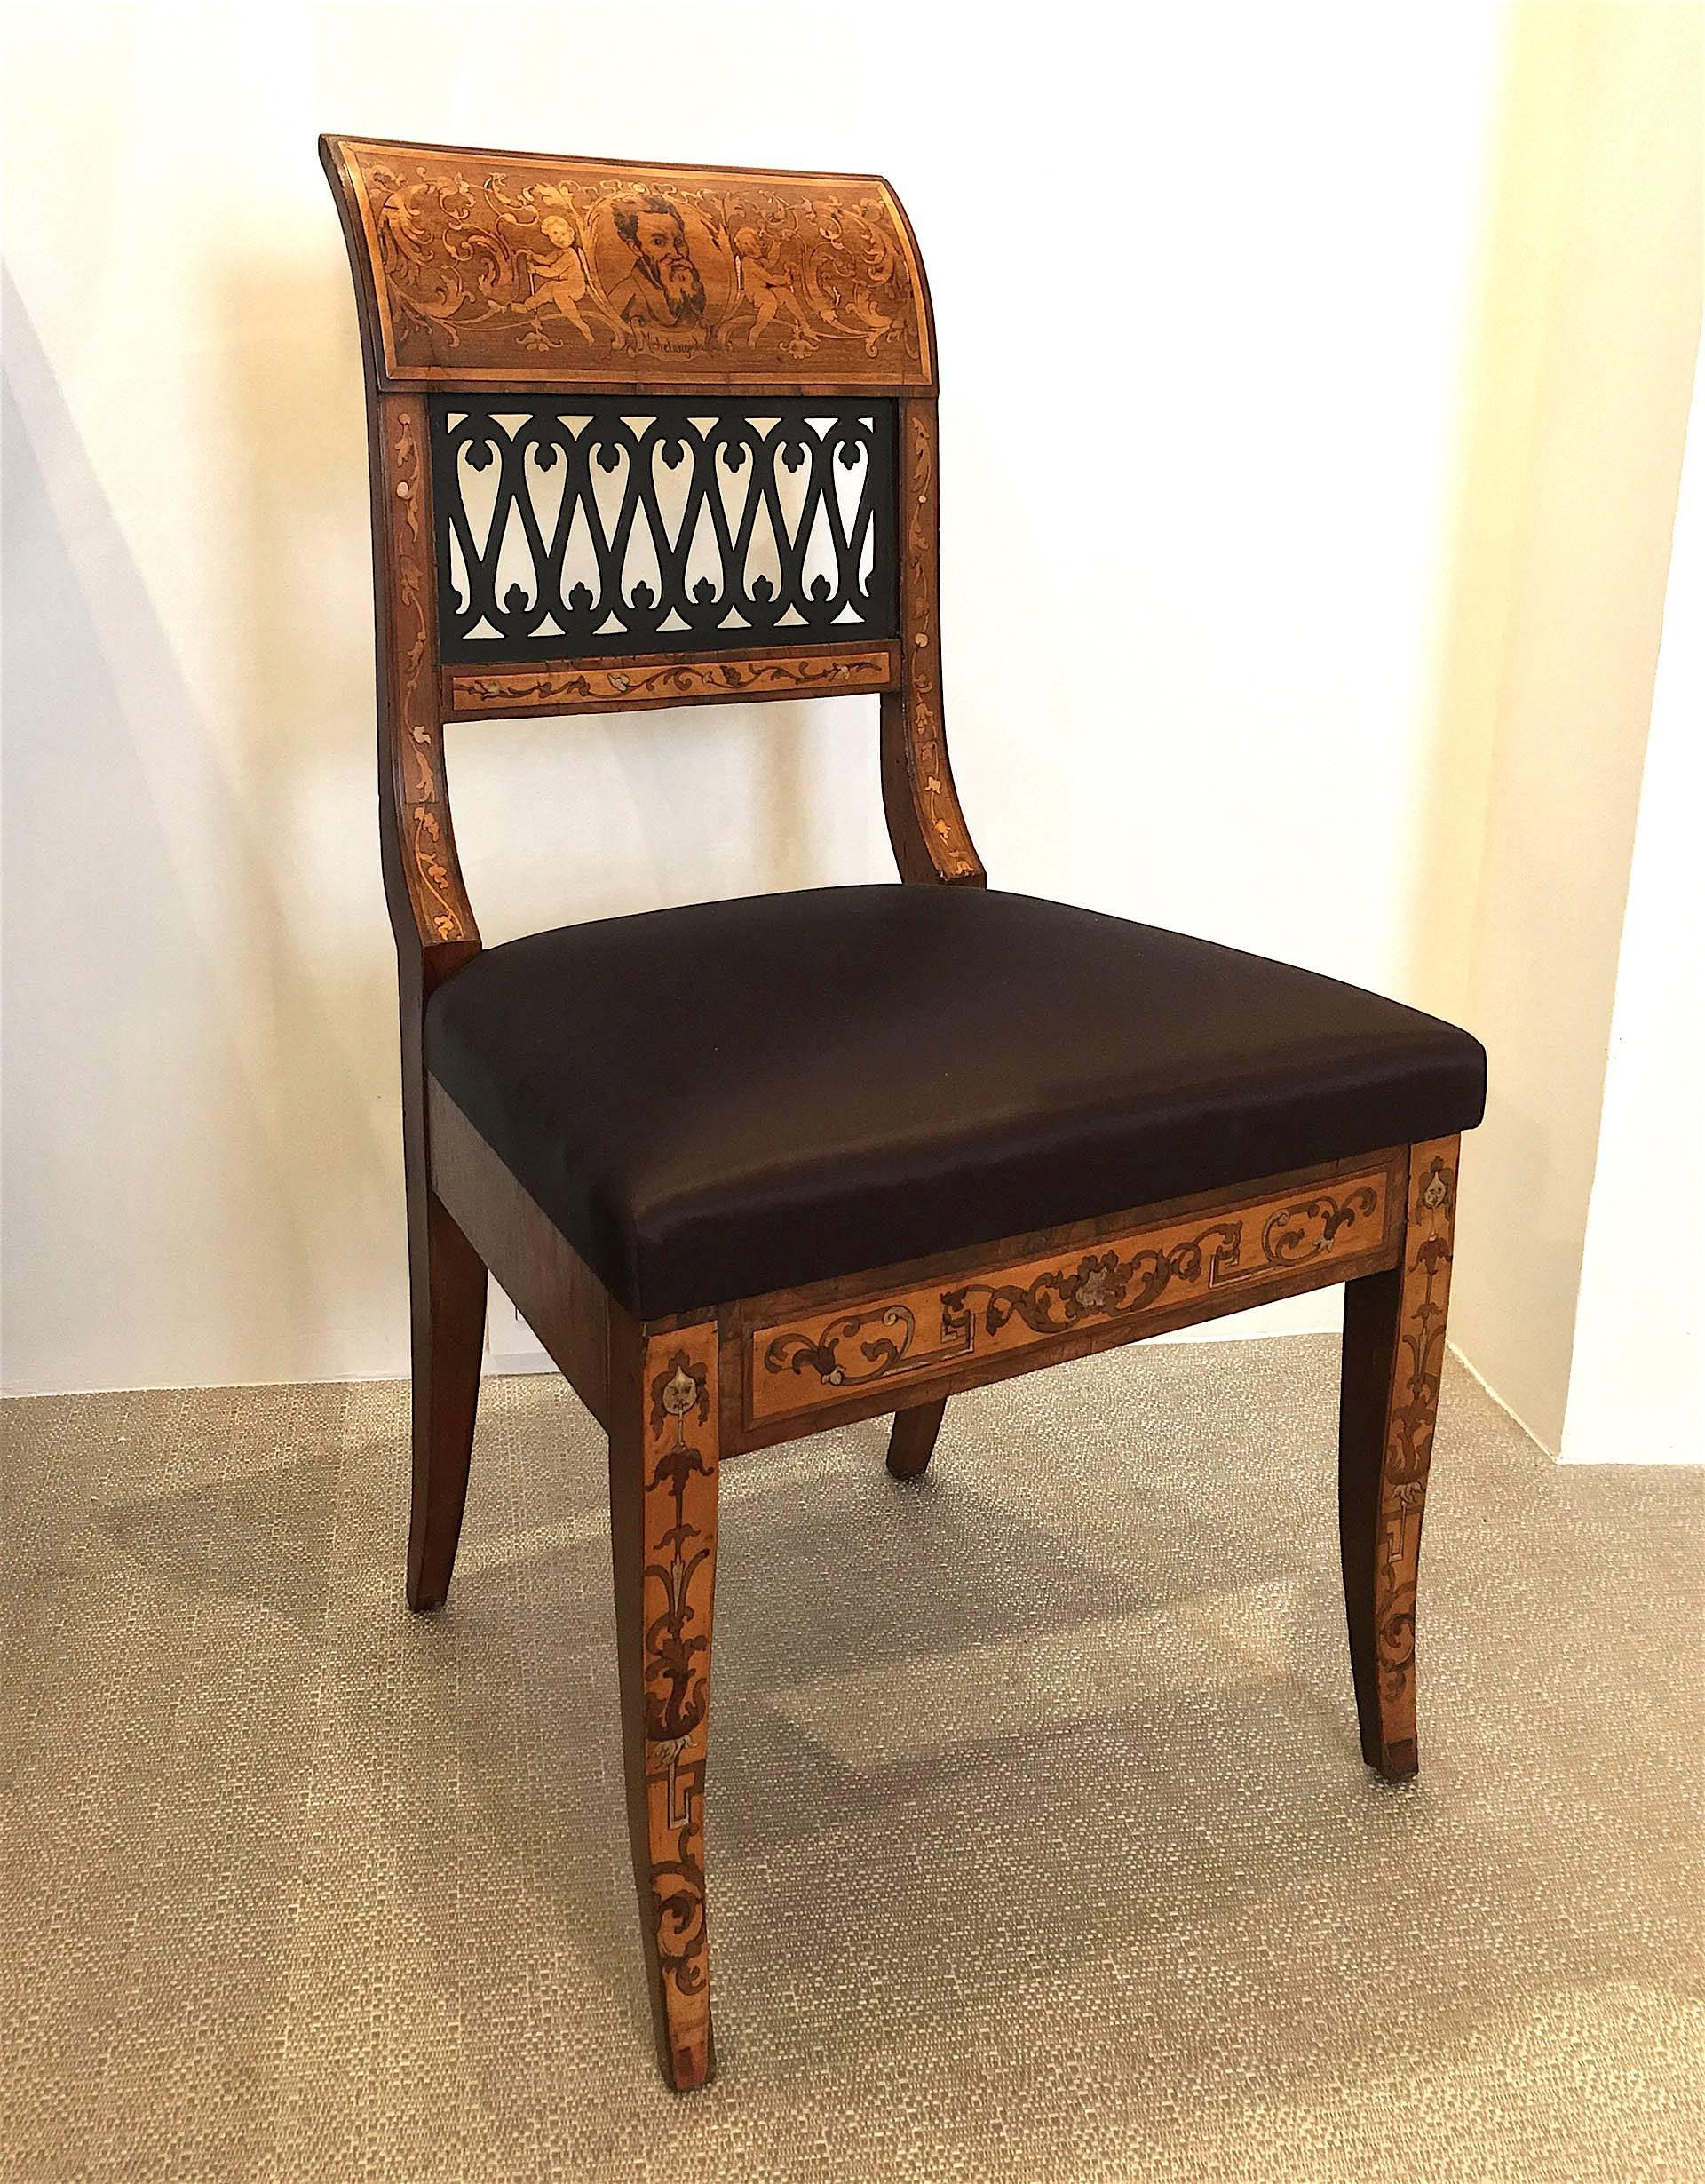 Set of four Italian Neoclassic (19th century) side chairs having a pierced ebonized back with each intricately designed and inlaid depictions of Renaissance artists Van Dyke, Michelangelo, Botticelli & Raphael.